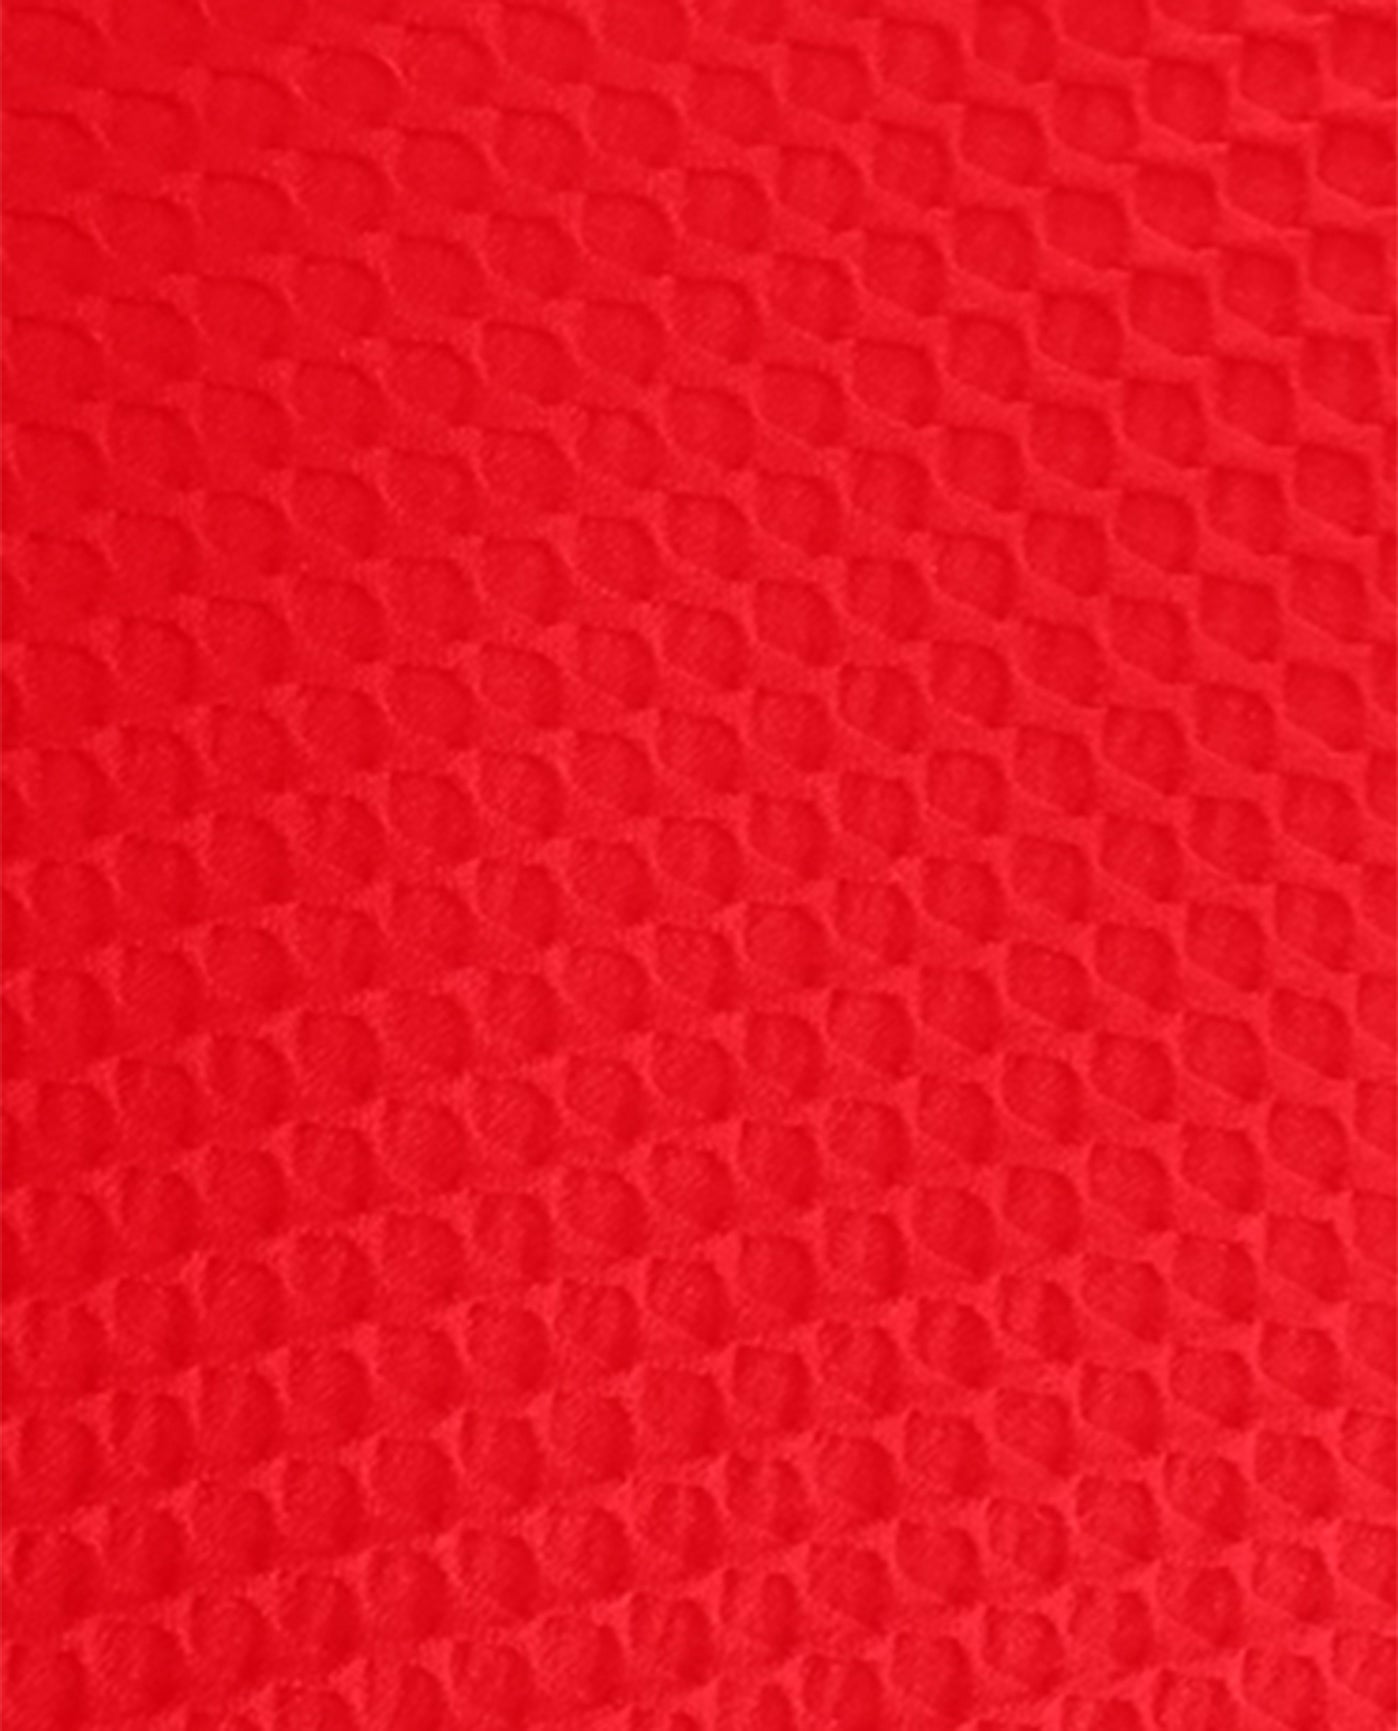 FABRIC SWATCH VIEW OF CHLORINE RESISTANT AQUAMORE COLOR BLOCK TEXTURED SPORTY PLUS SIZE SWIMSUIT | 616 AQT TEXTURED SCARLET